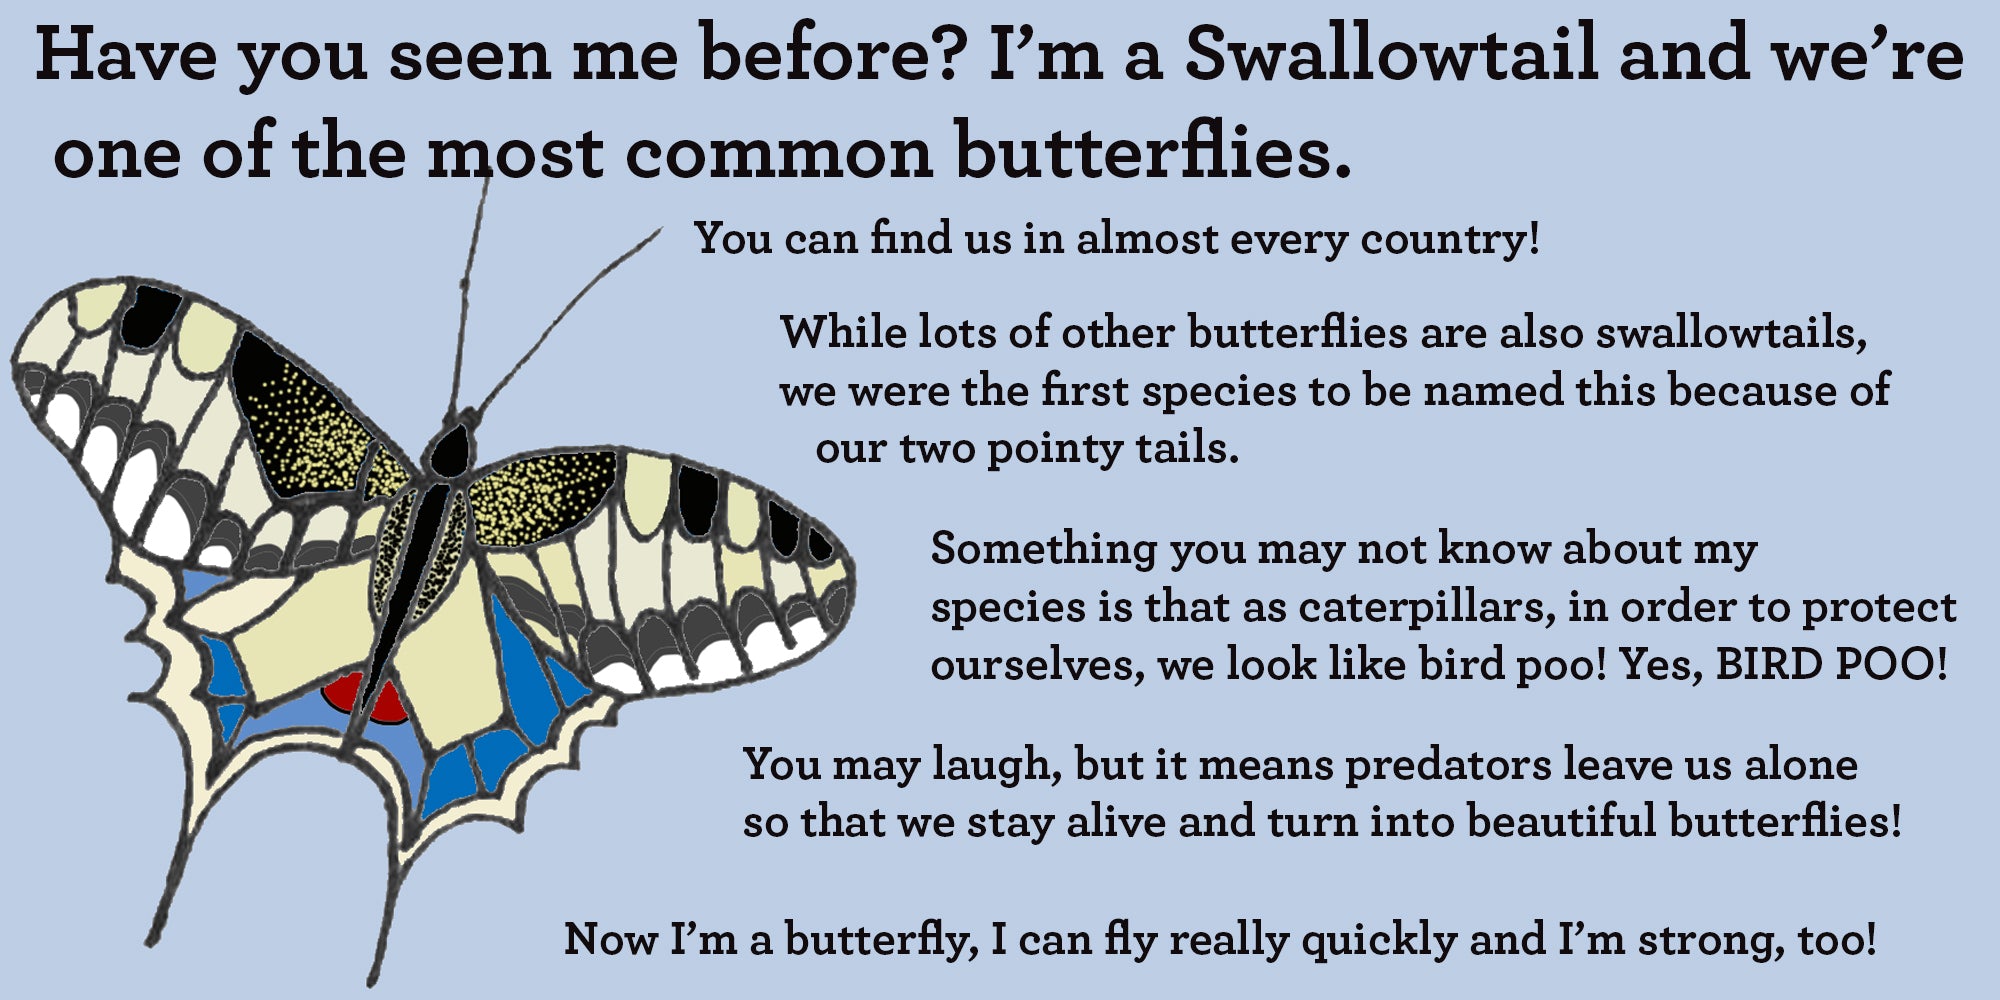 swallowtail butterfly facts